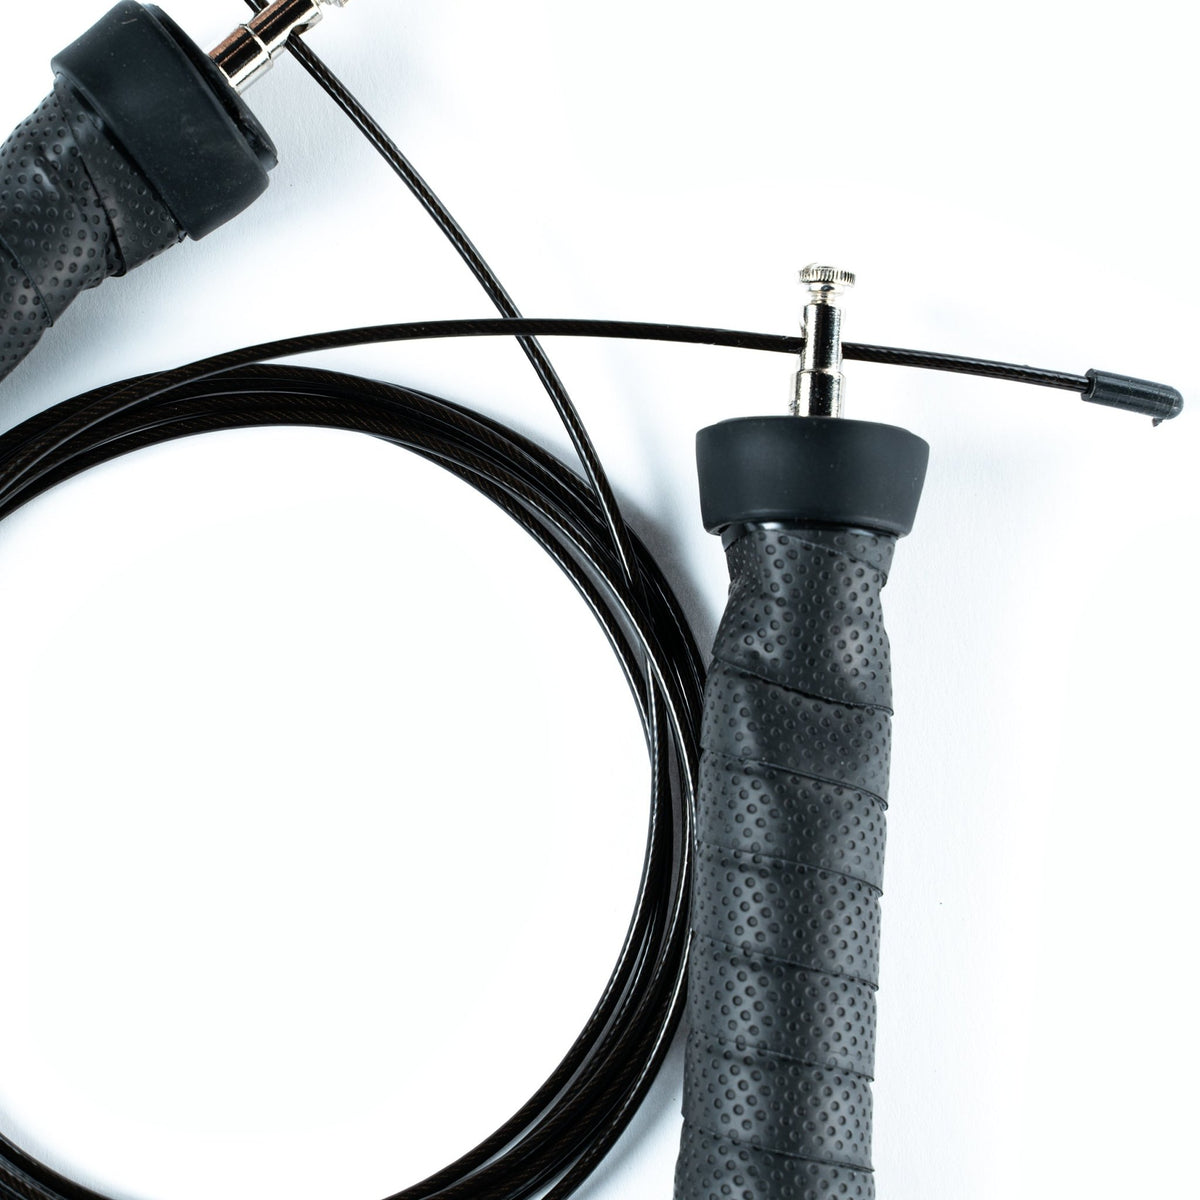 FitWay Equip. FitWay Ergonomic Grip Speed Rope - Fitness Experience